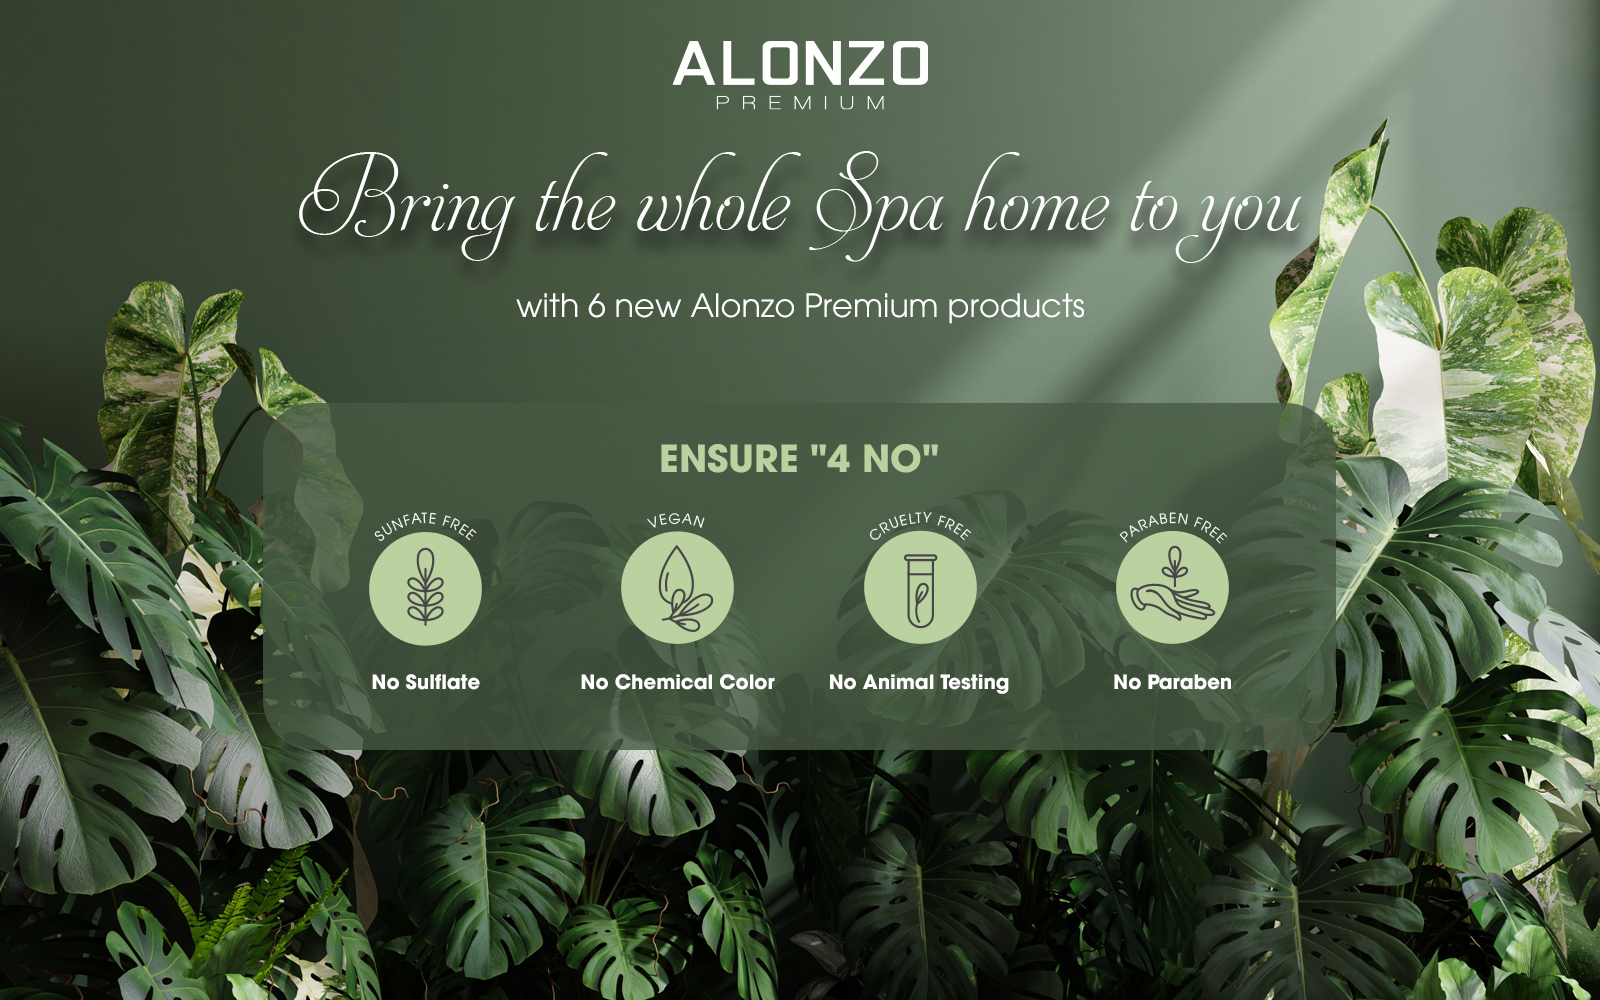 Bring the whole Spa home to you with 6 new Alonzo Premium products